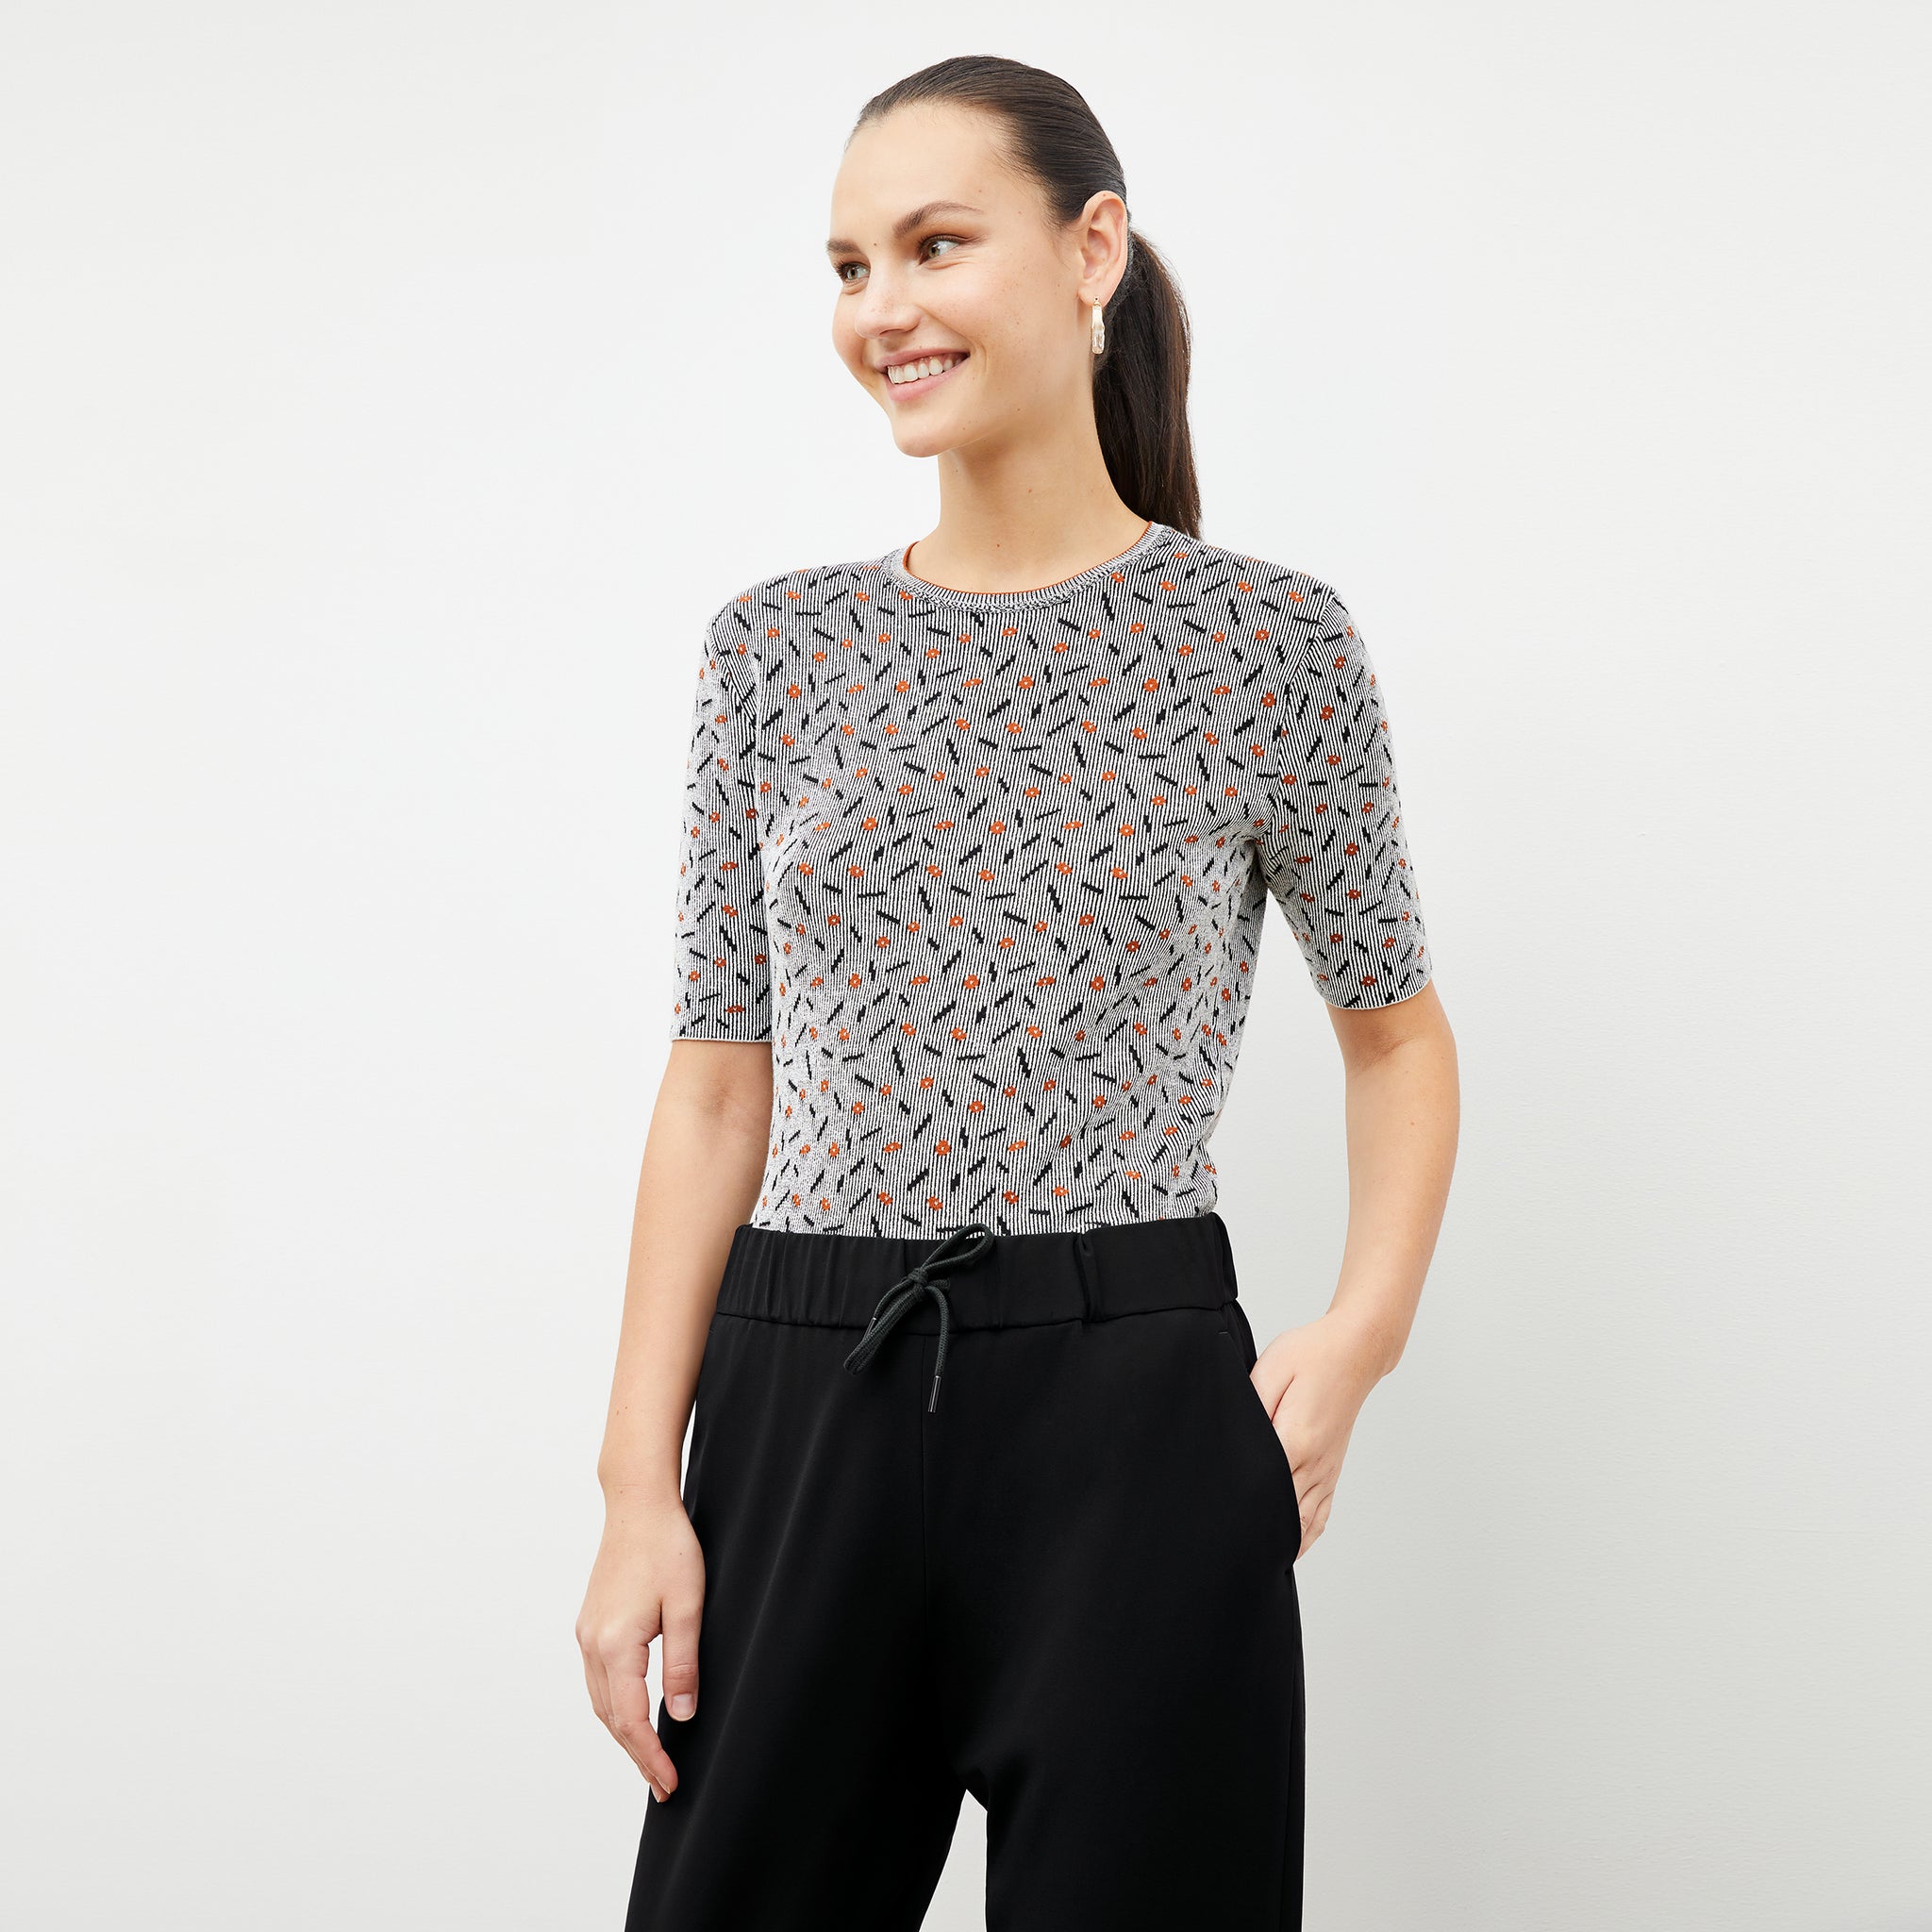 Front image of a woman wearing the Charli Top in Brick and Black 